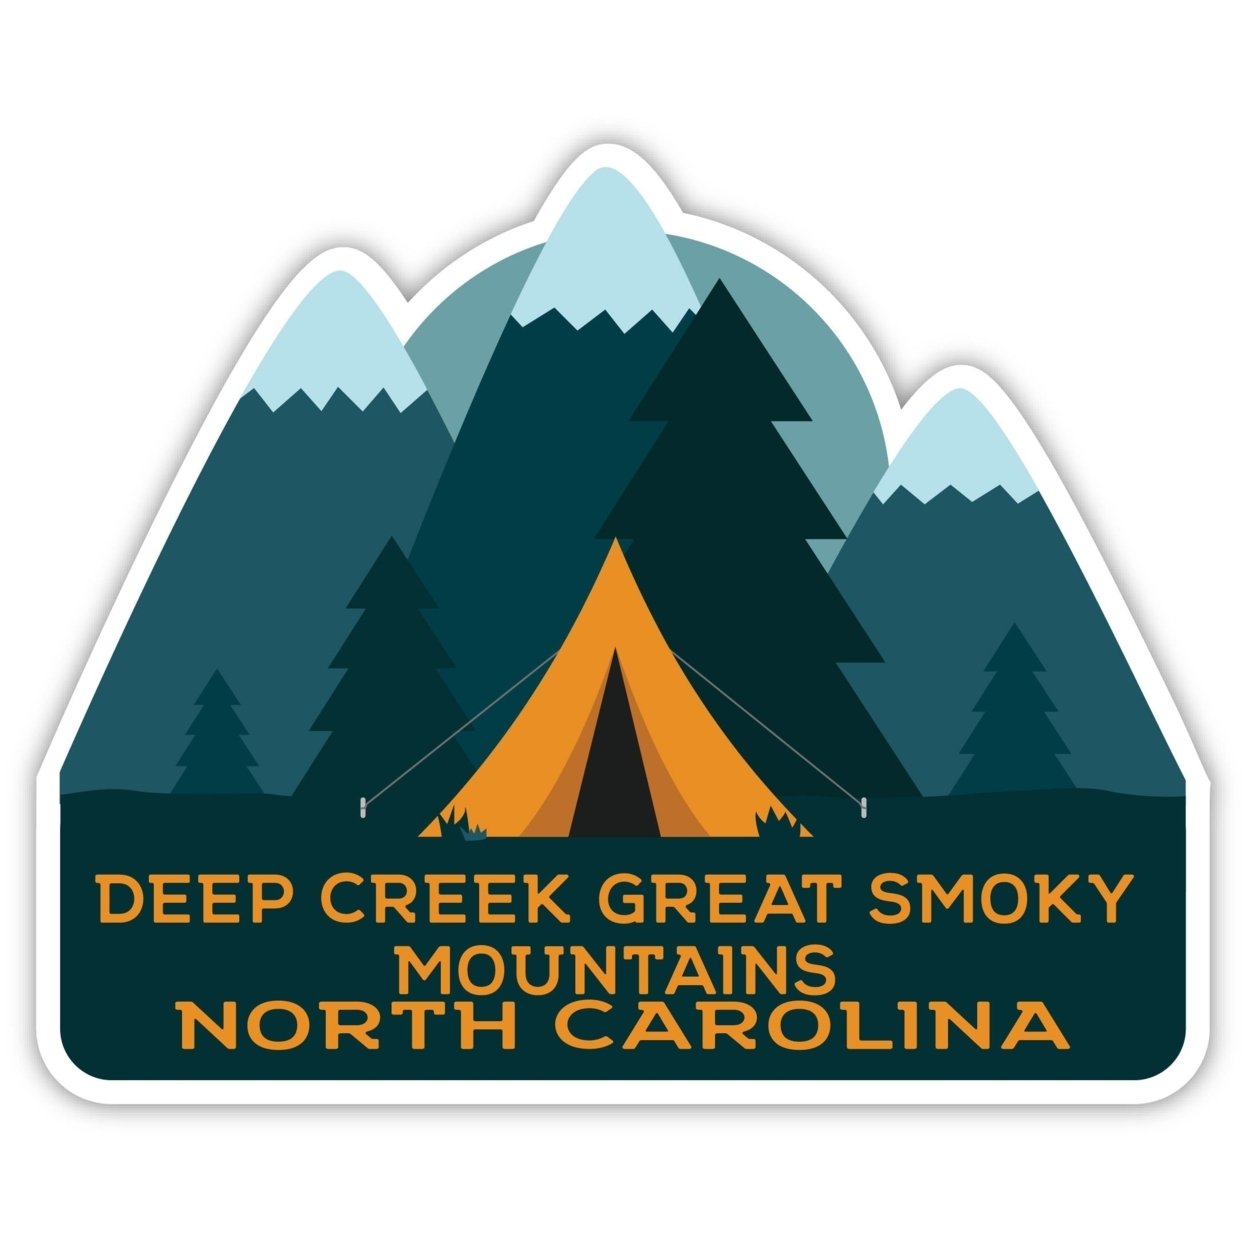 Deep Creek Great Smoky Mountains North Carolina Souvenir Decorative Stickers (Choose Theme And Size) - 4-Pack, 6-Inch, Tent